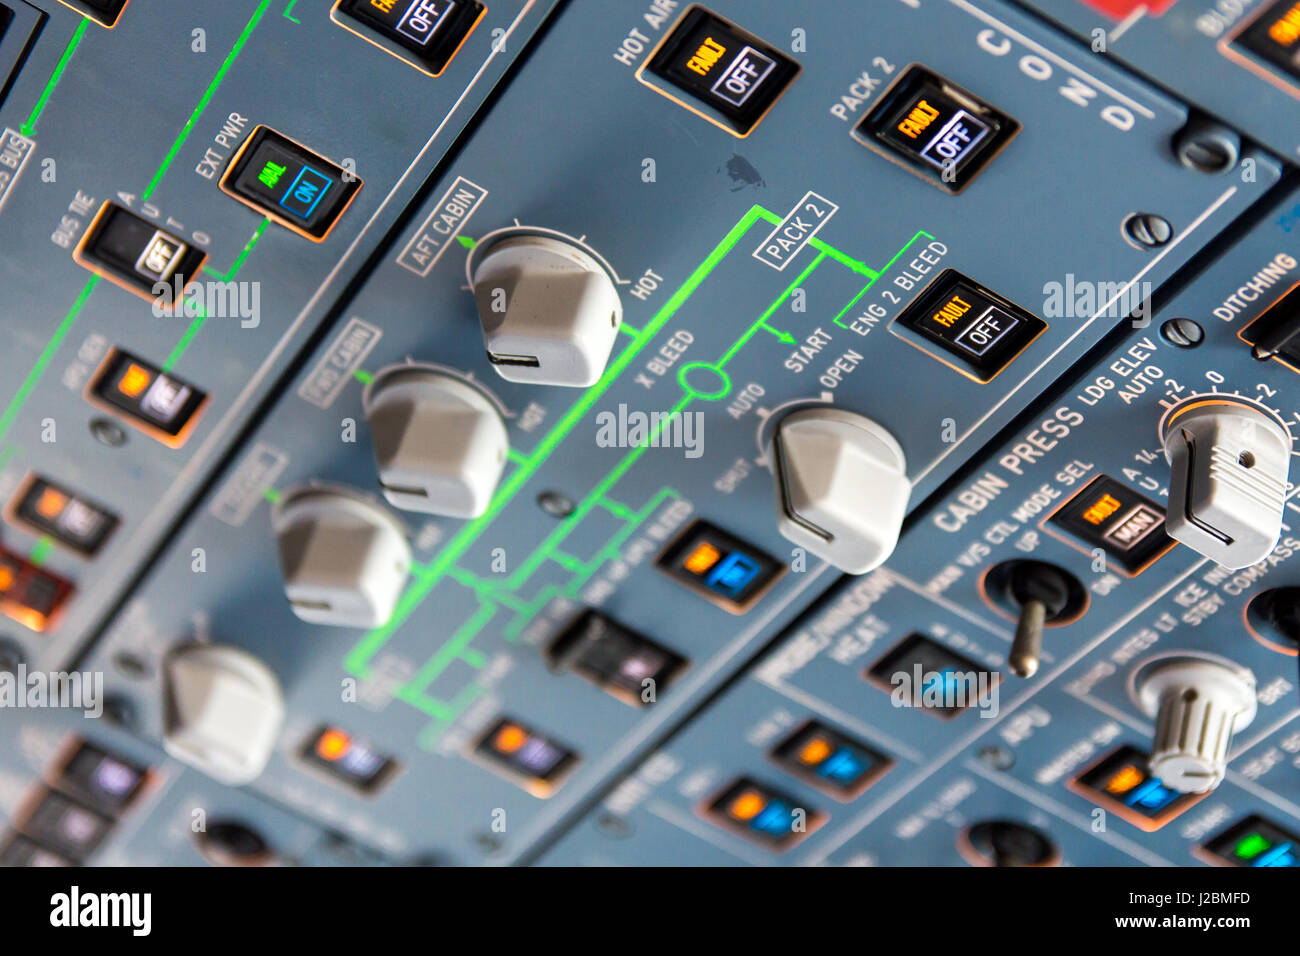 Airbus A320 overhead panel with switches and knobs for controlling various aircraft systems and components. Stock Photo